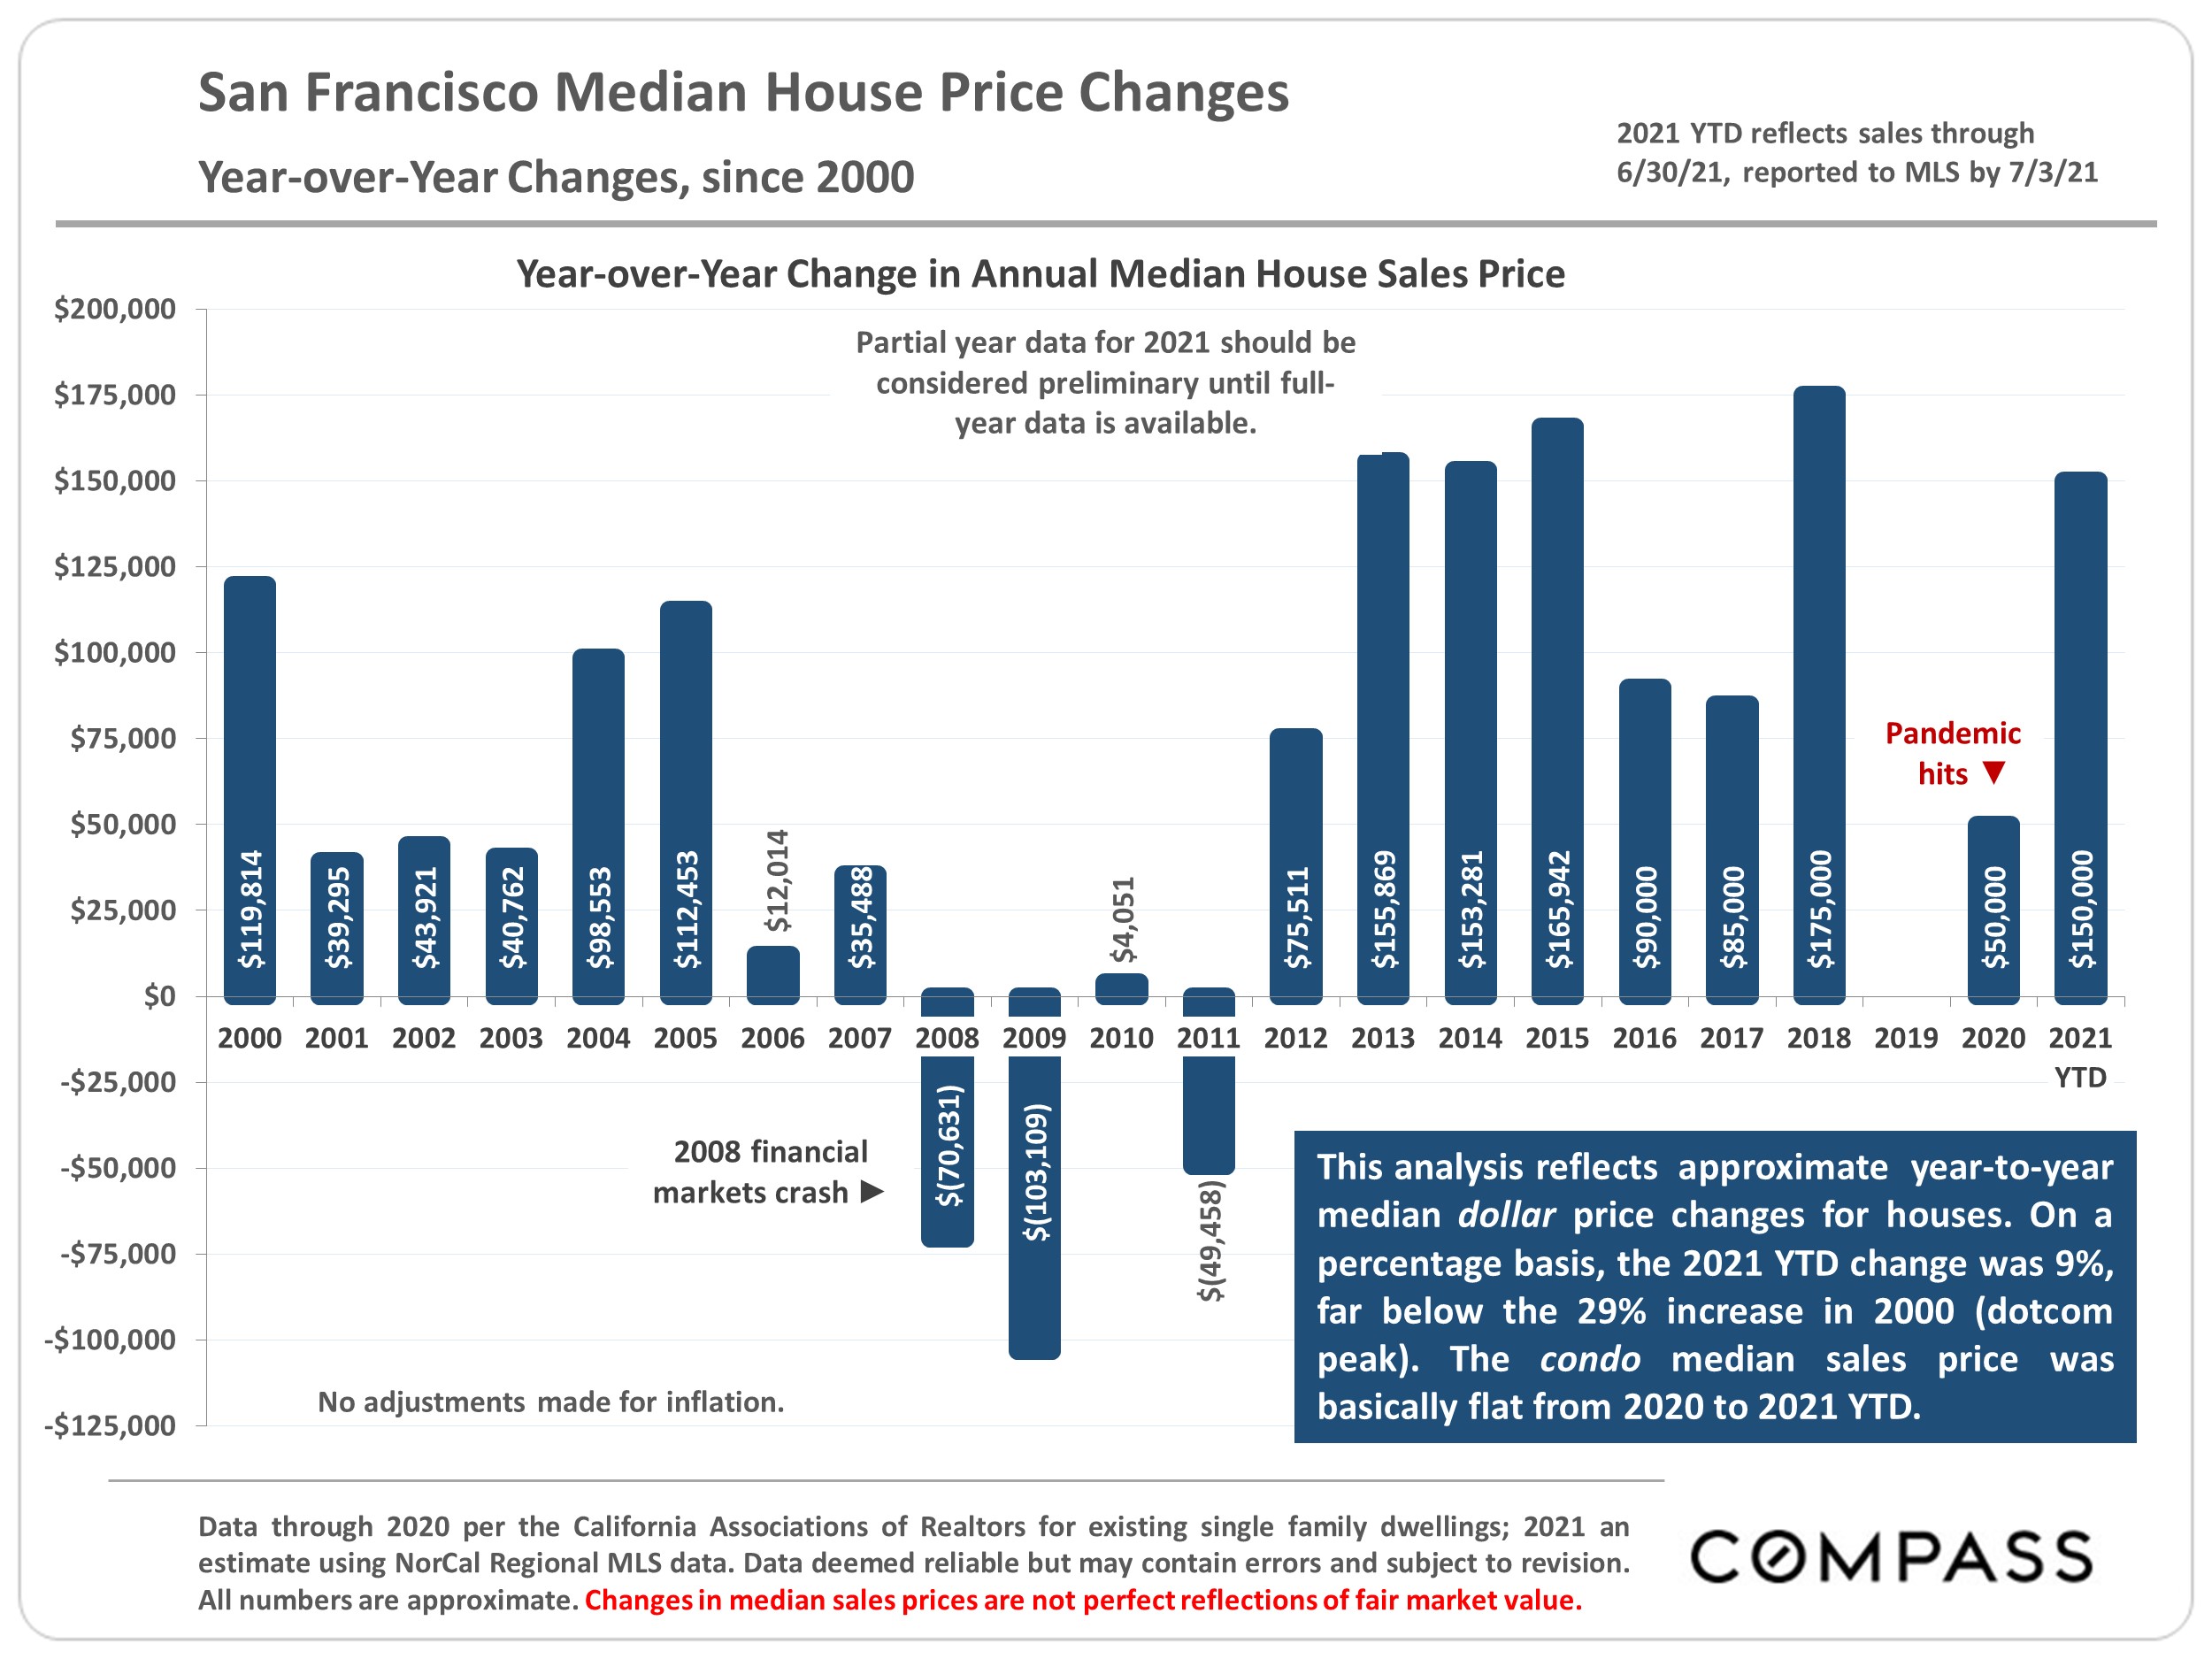 Year over Year Change in Annual Median House Sales Price since 2000